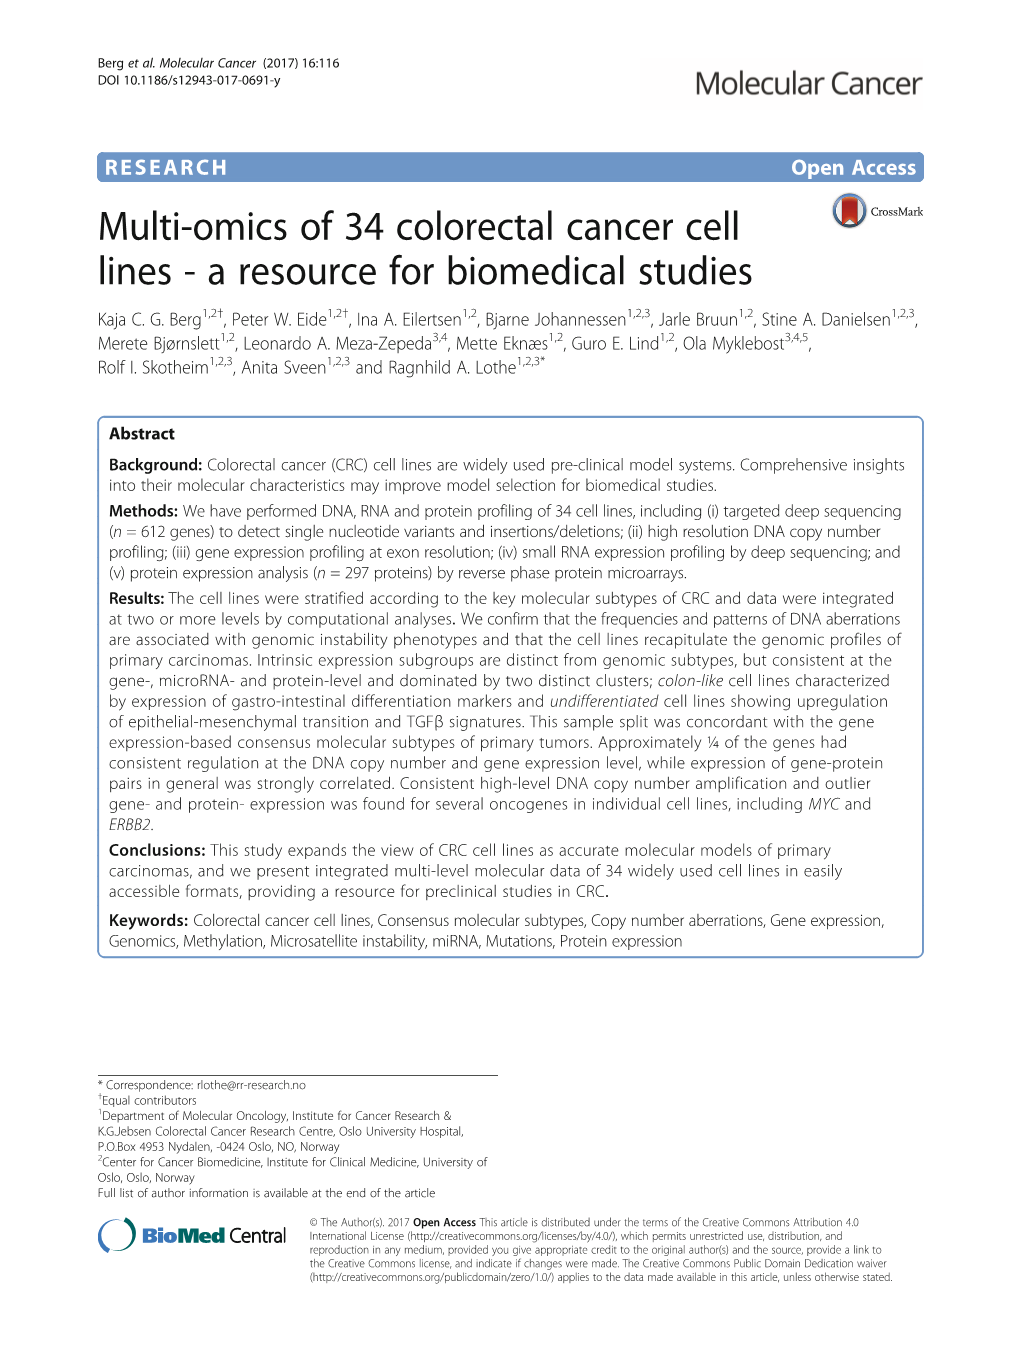 Multi-Omics of 34 Colorectal Cancer Cell Lines - a Resource for Biomedical Studies Kaja C